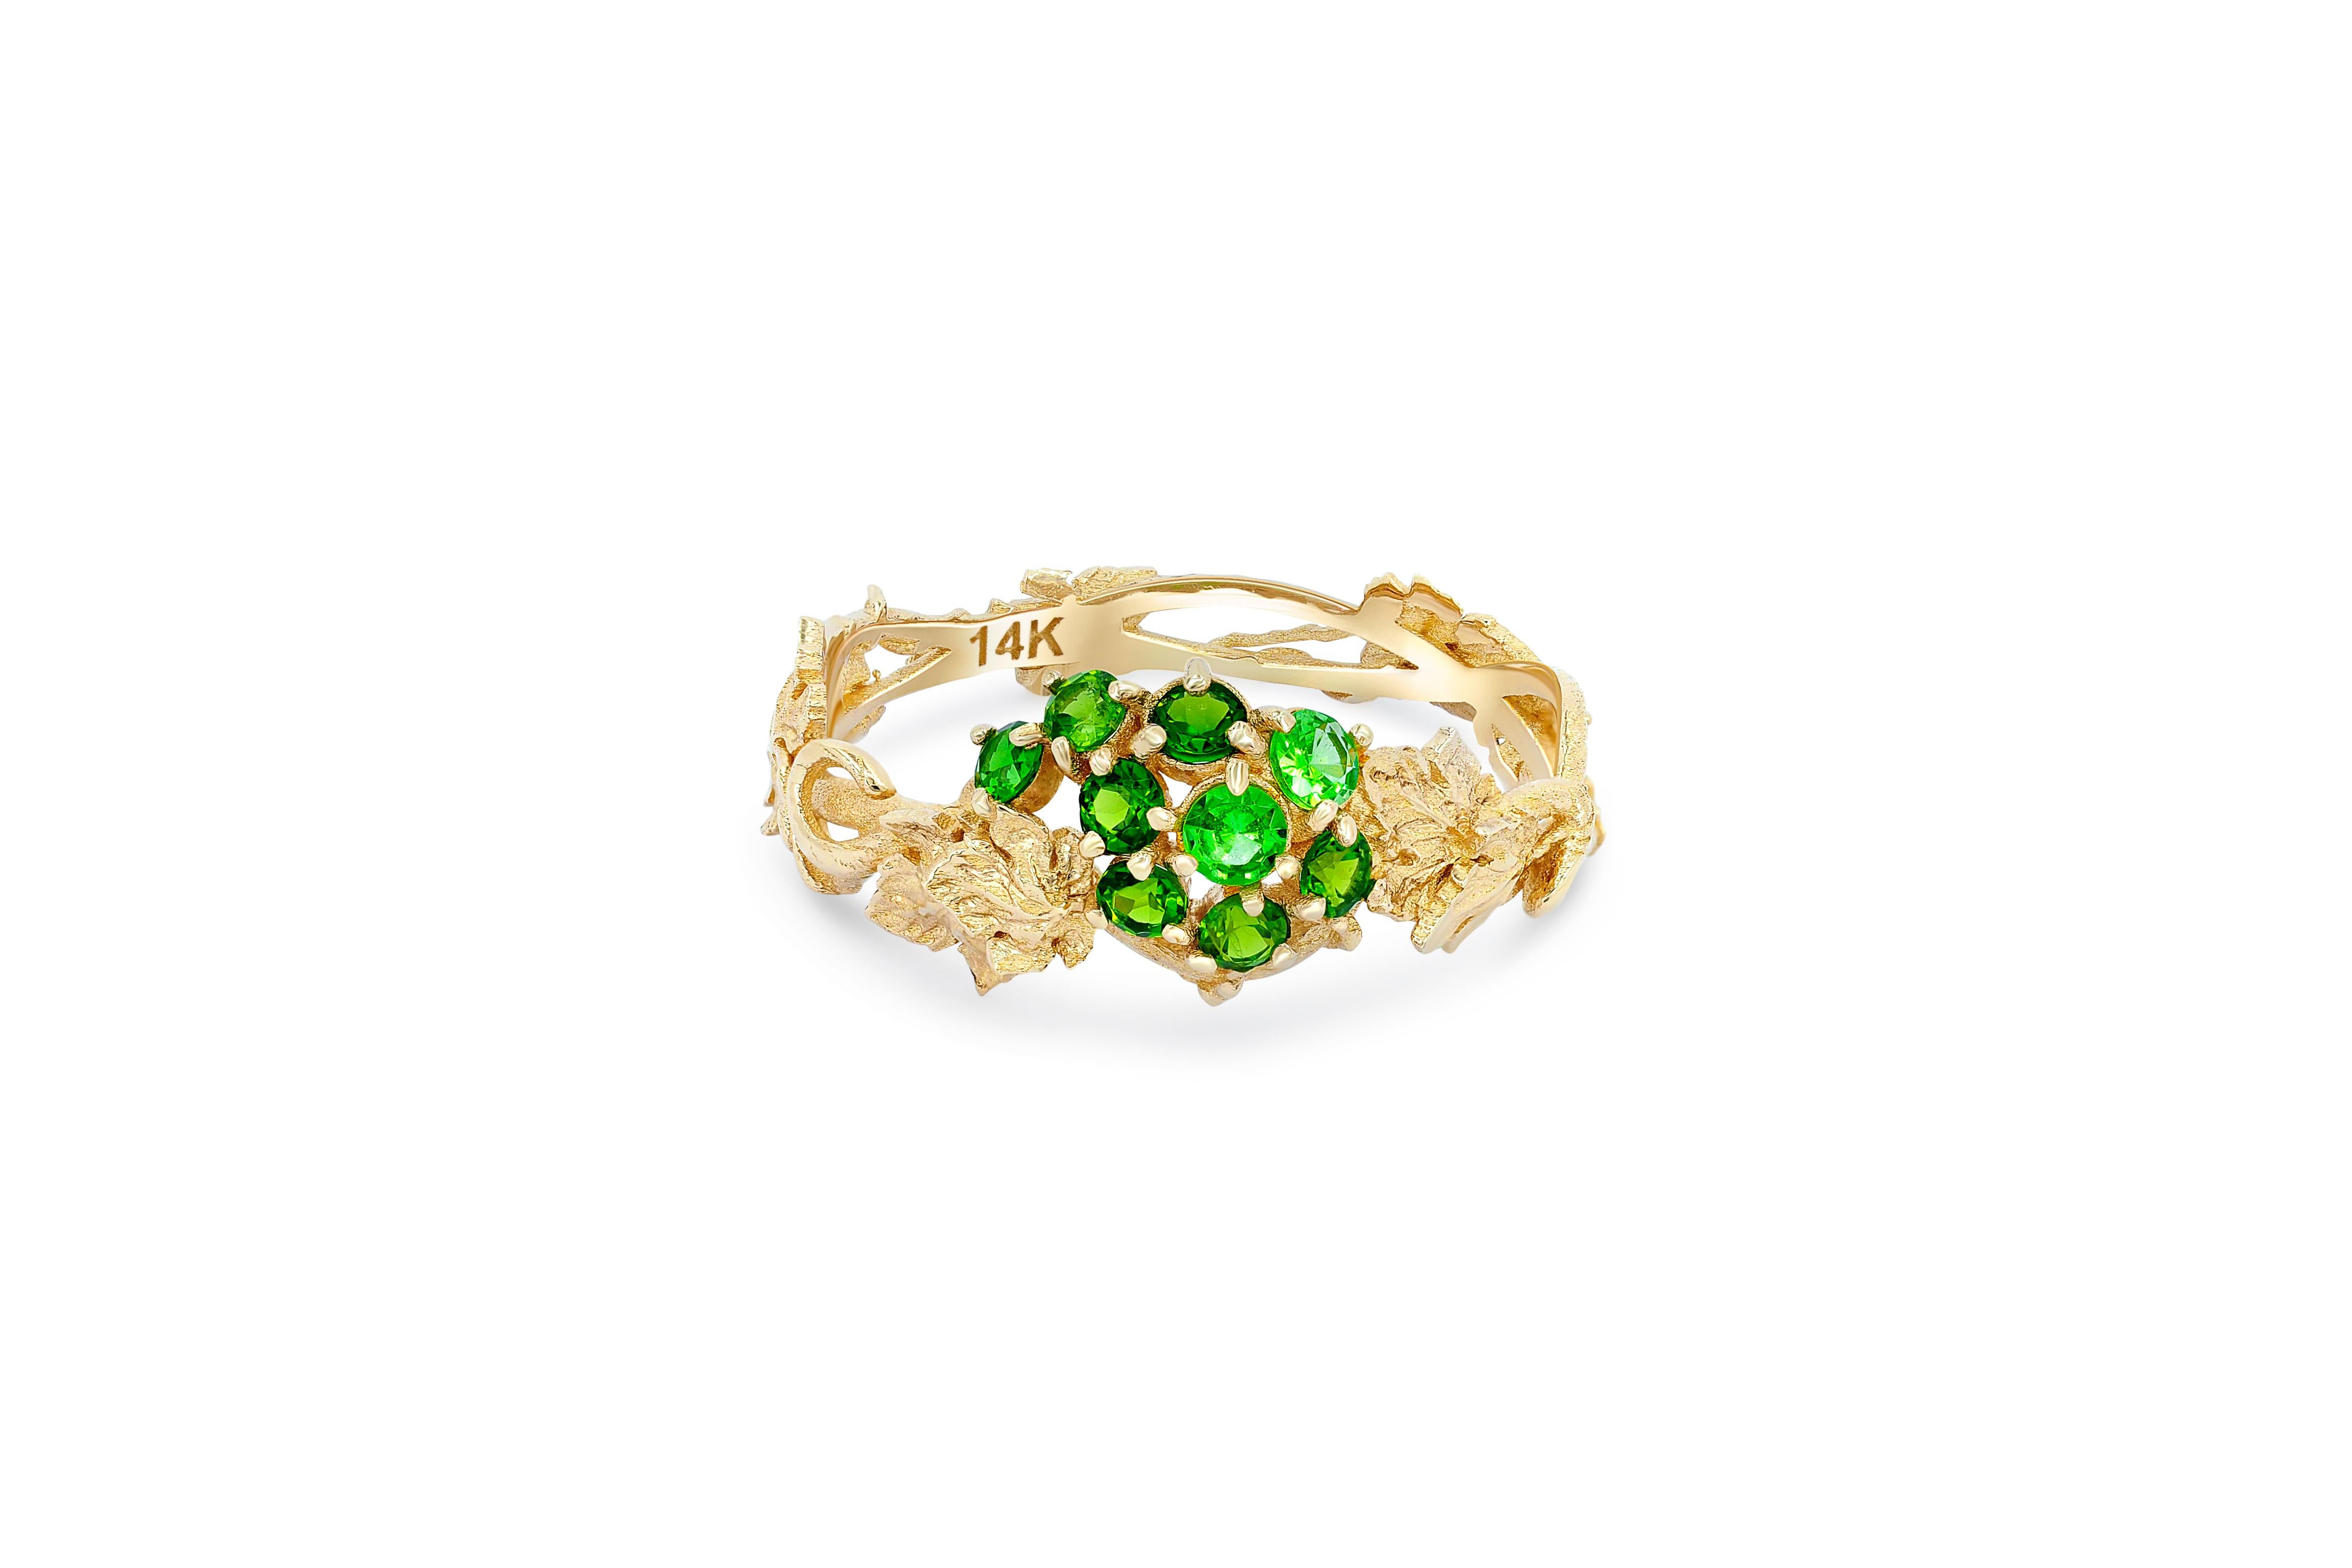 Grape ring with tsavorites. 
Green garnet tsavorite 14k gold ring. Vine Leaves Ring. Fertility ring. Plant ring. Baroque Versailles ring.

Metal: 14k gold
Weight: 1.96 g. depends from size.

Set with round cut tsavorites 9 pieces
Clarity: